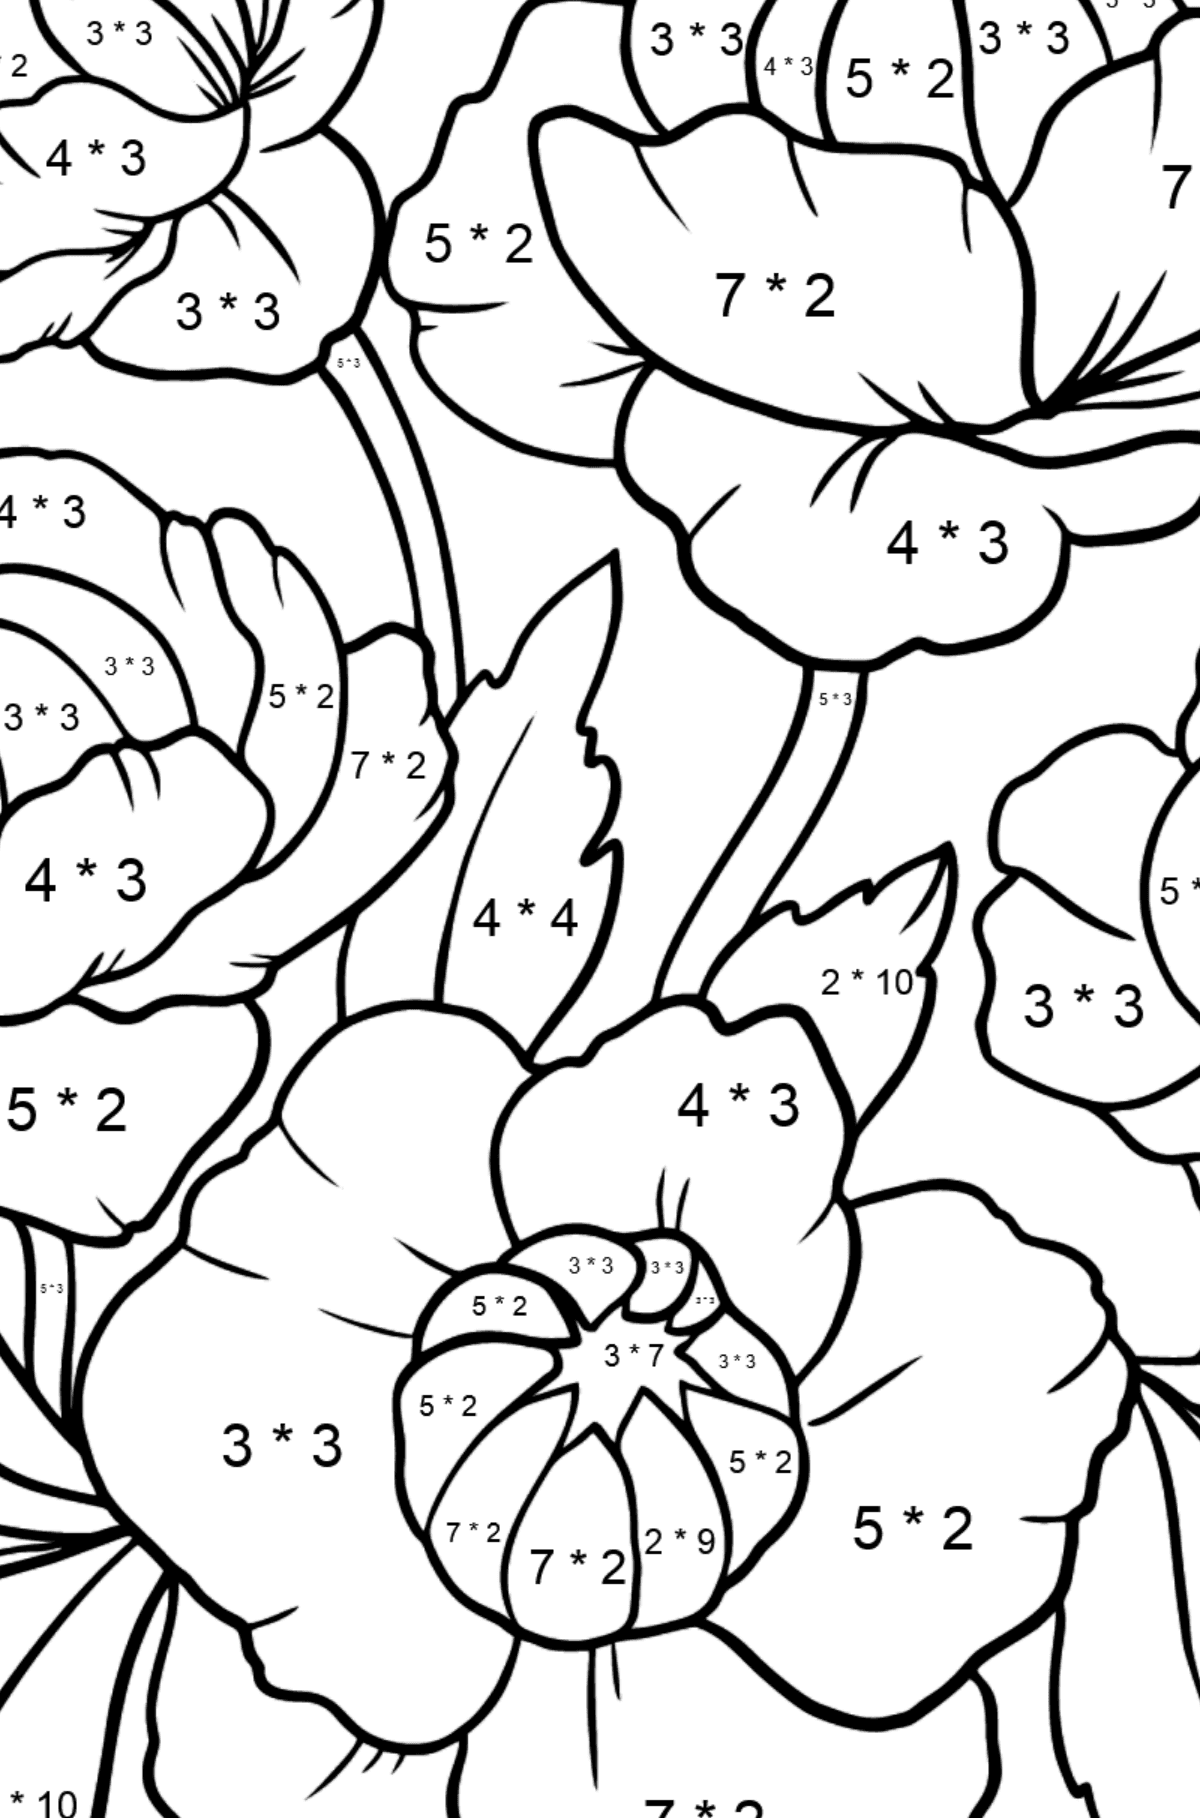 Red Globeflower Coloring Page - Math Coloring - Multiplication for Kids